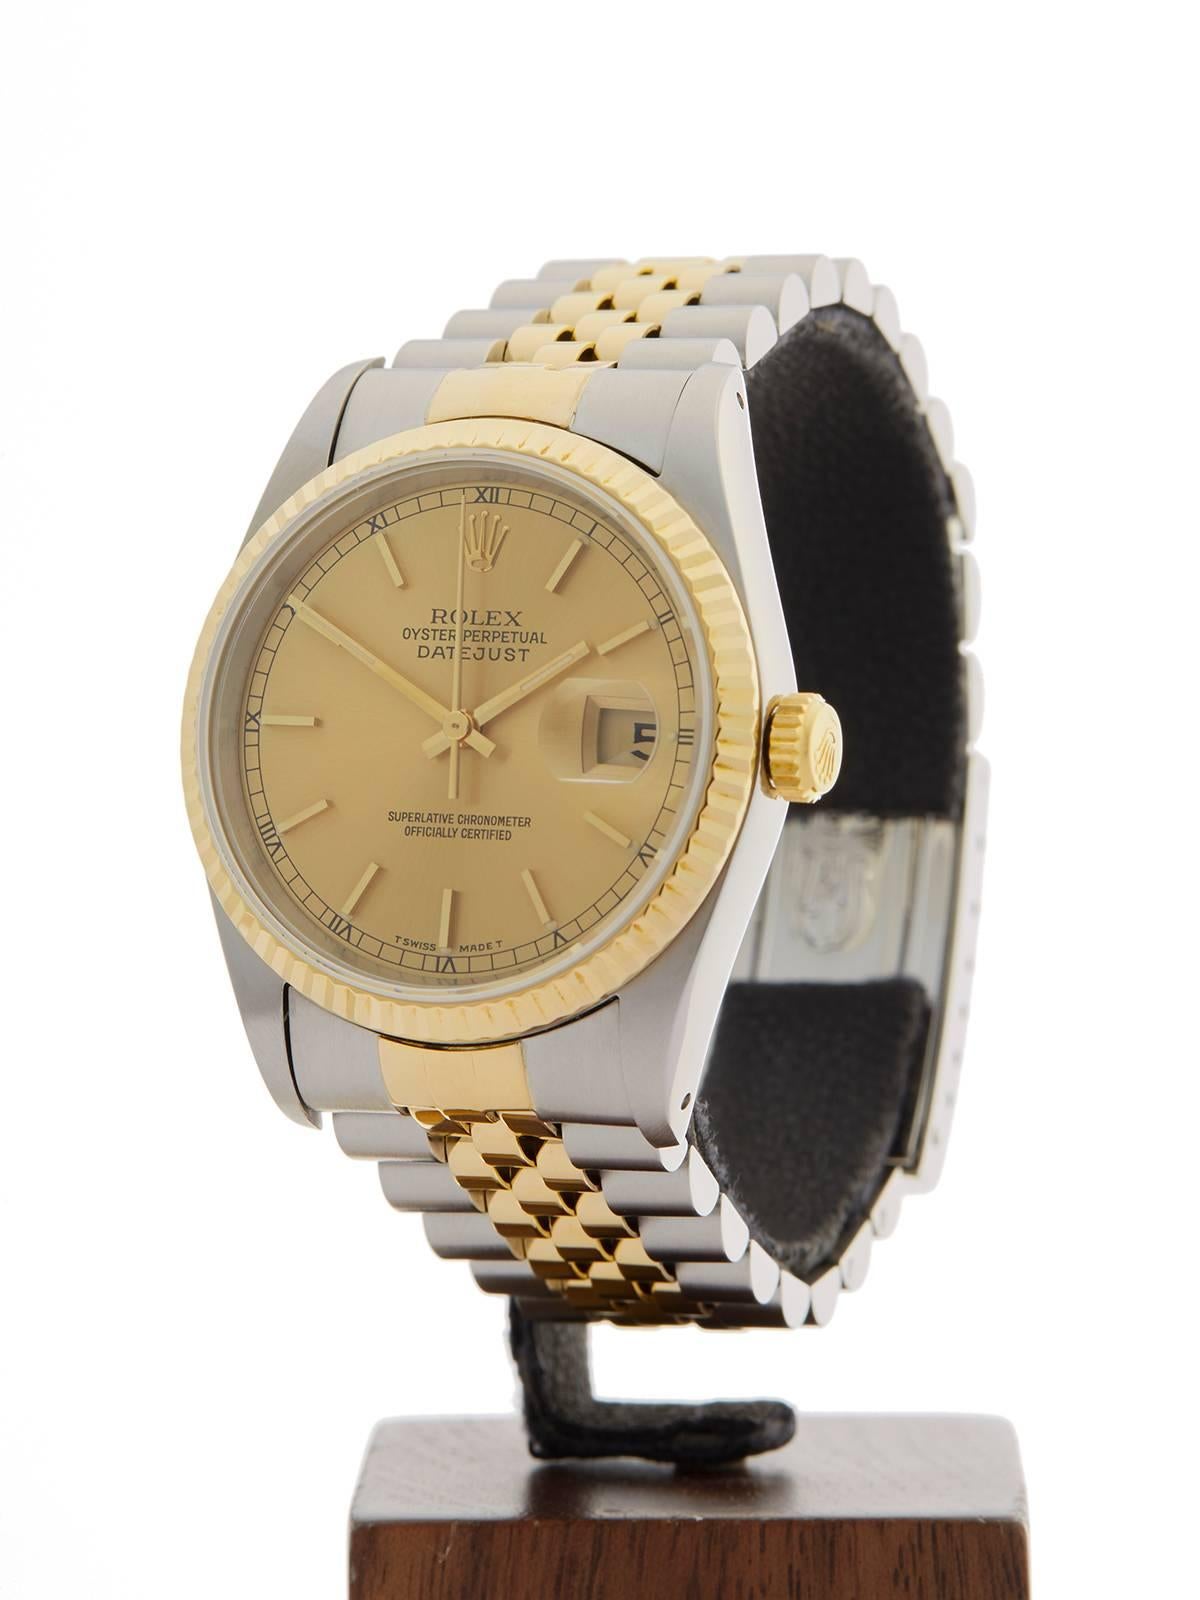 REF	W3587
MODEL NUMBER	16233
SERIAL NUMBER	S38****
CONDITION	9 - Excellent condition
GENDER	Unisex
AGE	10th June 1994
CASE DIAMETER	36 mm
CASE SIZE	36mm
BOX & PAPERS	Box, Manuals & Guarantee
MOVEMENT	Automatic
CASE	Stainless Steel/18k Yellow